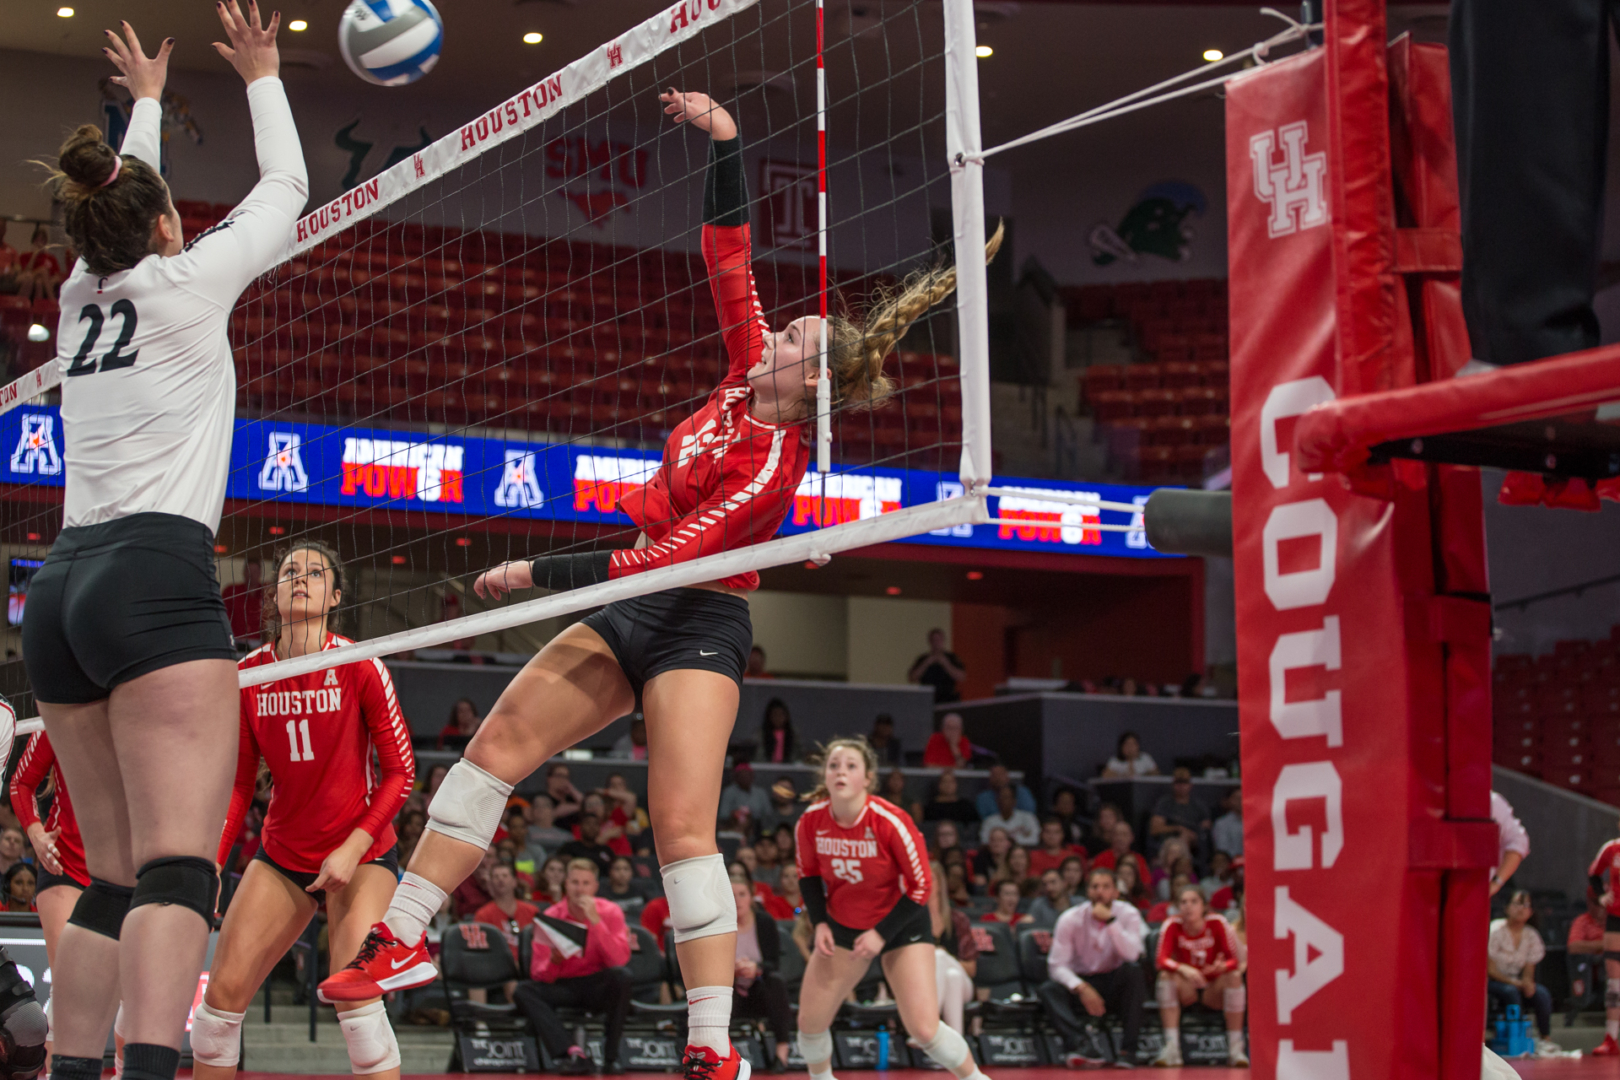 Cougars beat Wichita State in a three-set sweep on Sunday. This followed a loss against Tulsa, which ended Houston's conference win streak. | Trevor Nolley/The Cougar